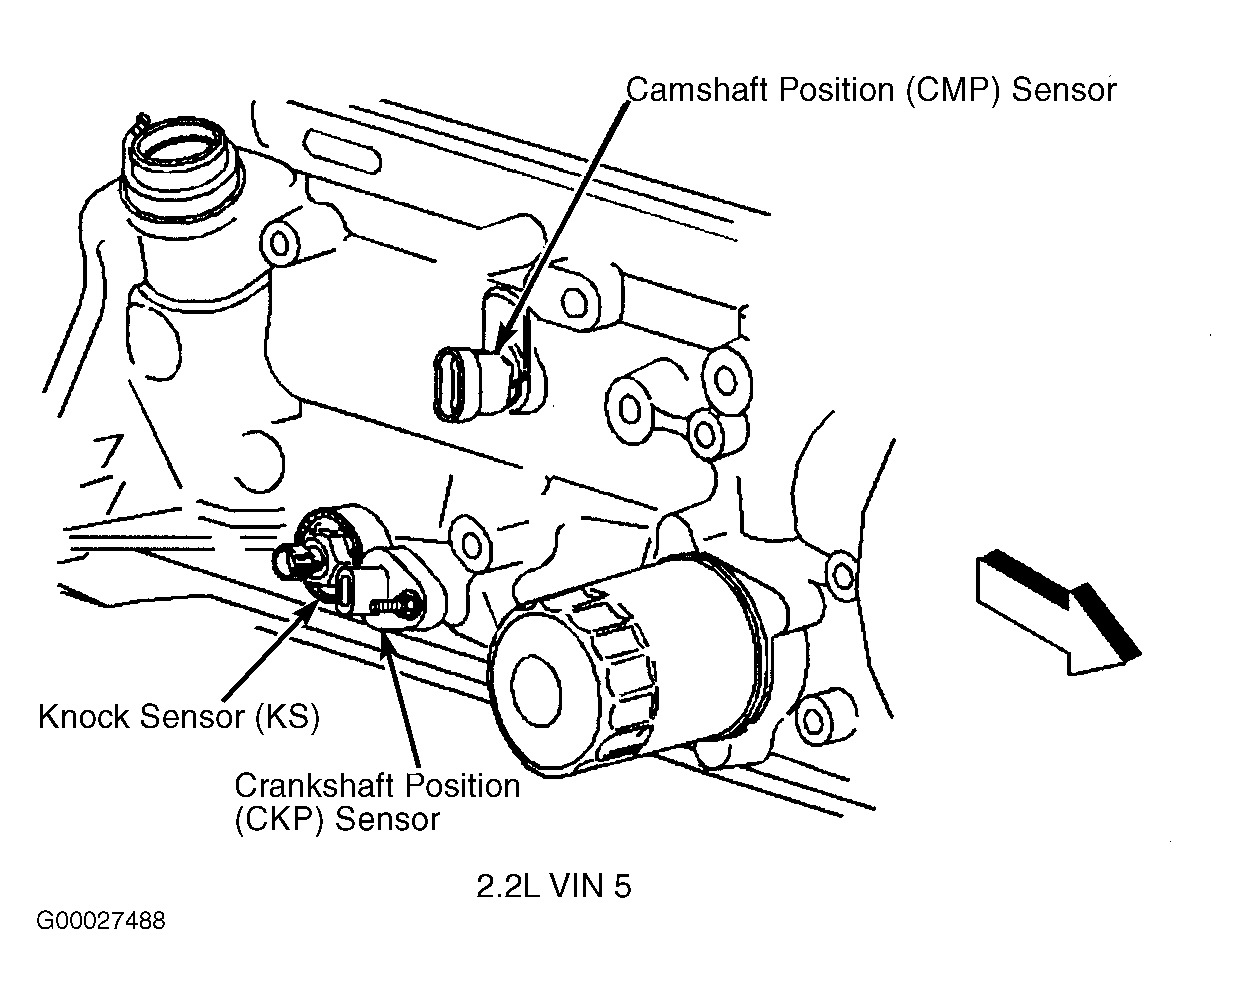 Chevrolet Blazer 2002 - Component Locations -  Right Side Of Engine (2.2L VIN 5)